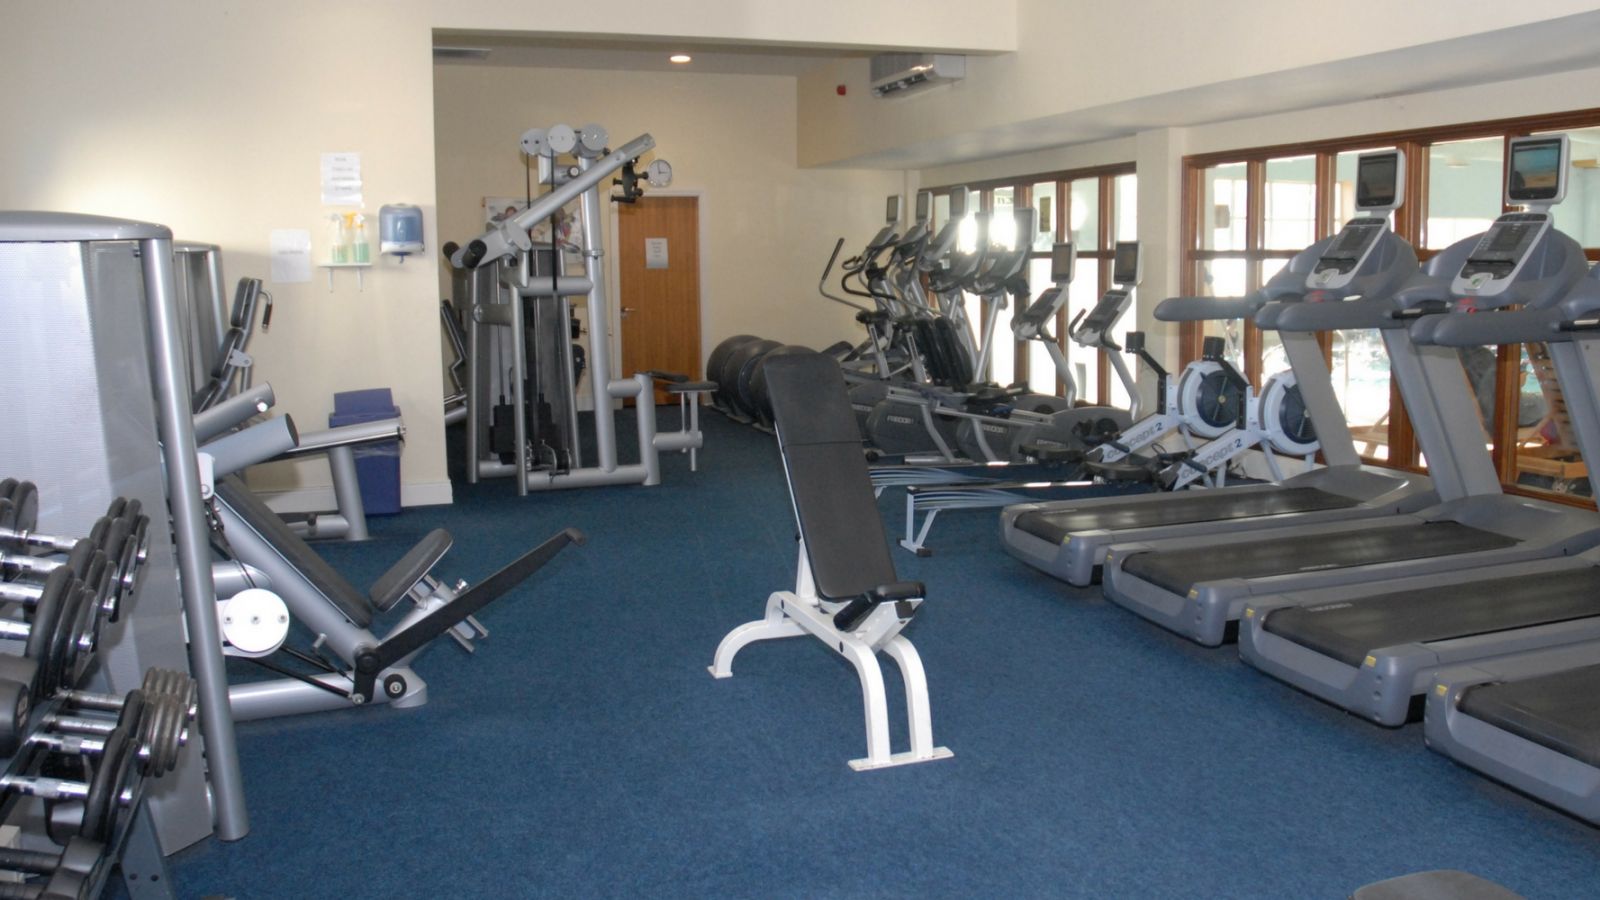 Work Out Area at Auburn Lodge Hotel